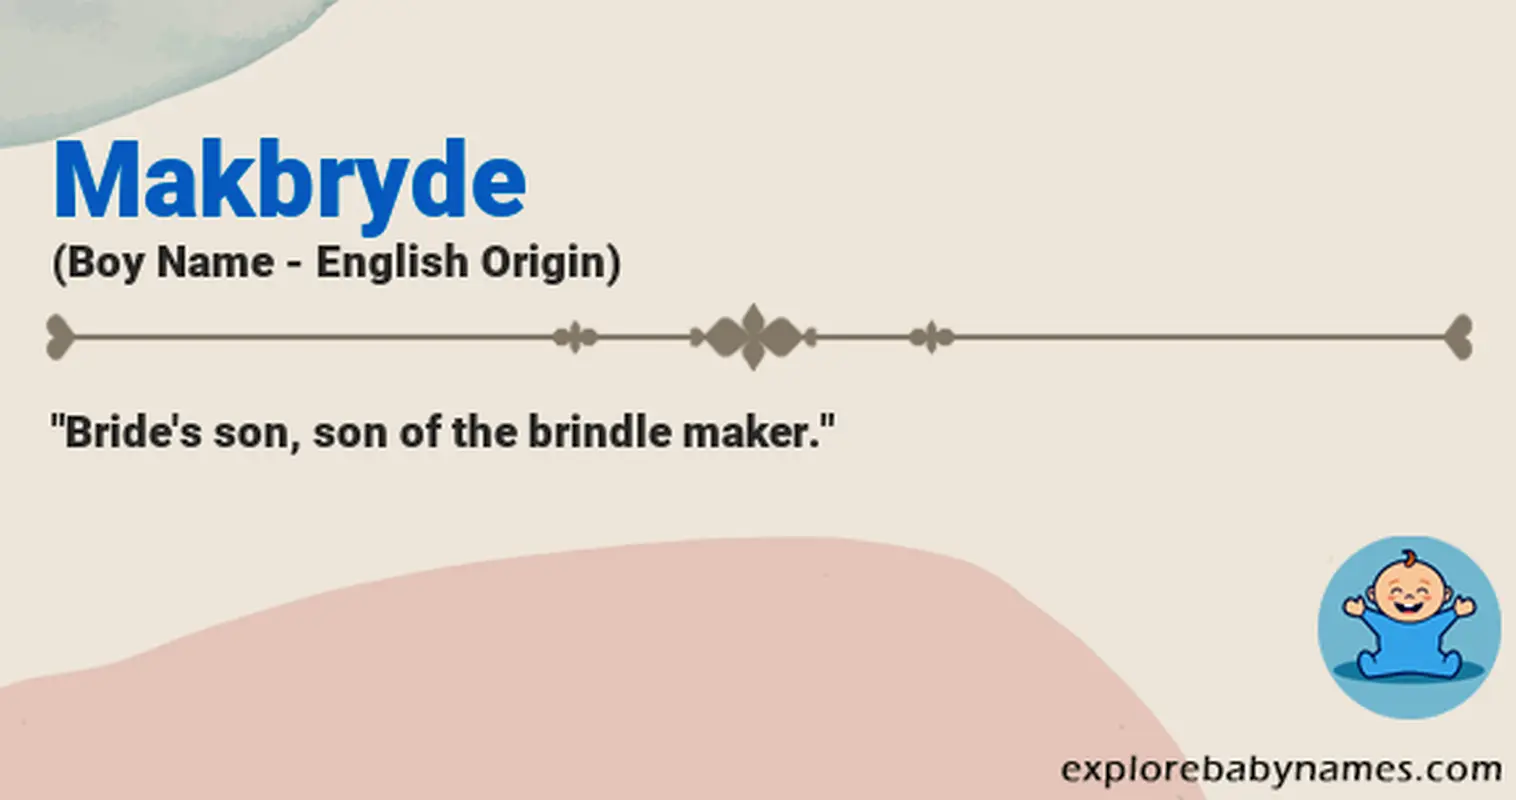 Meaning of Makbryde